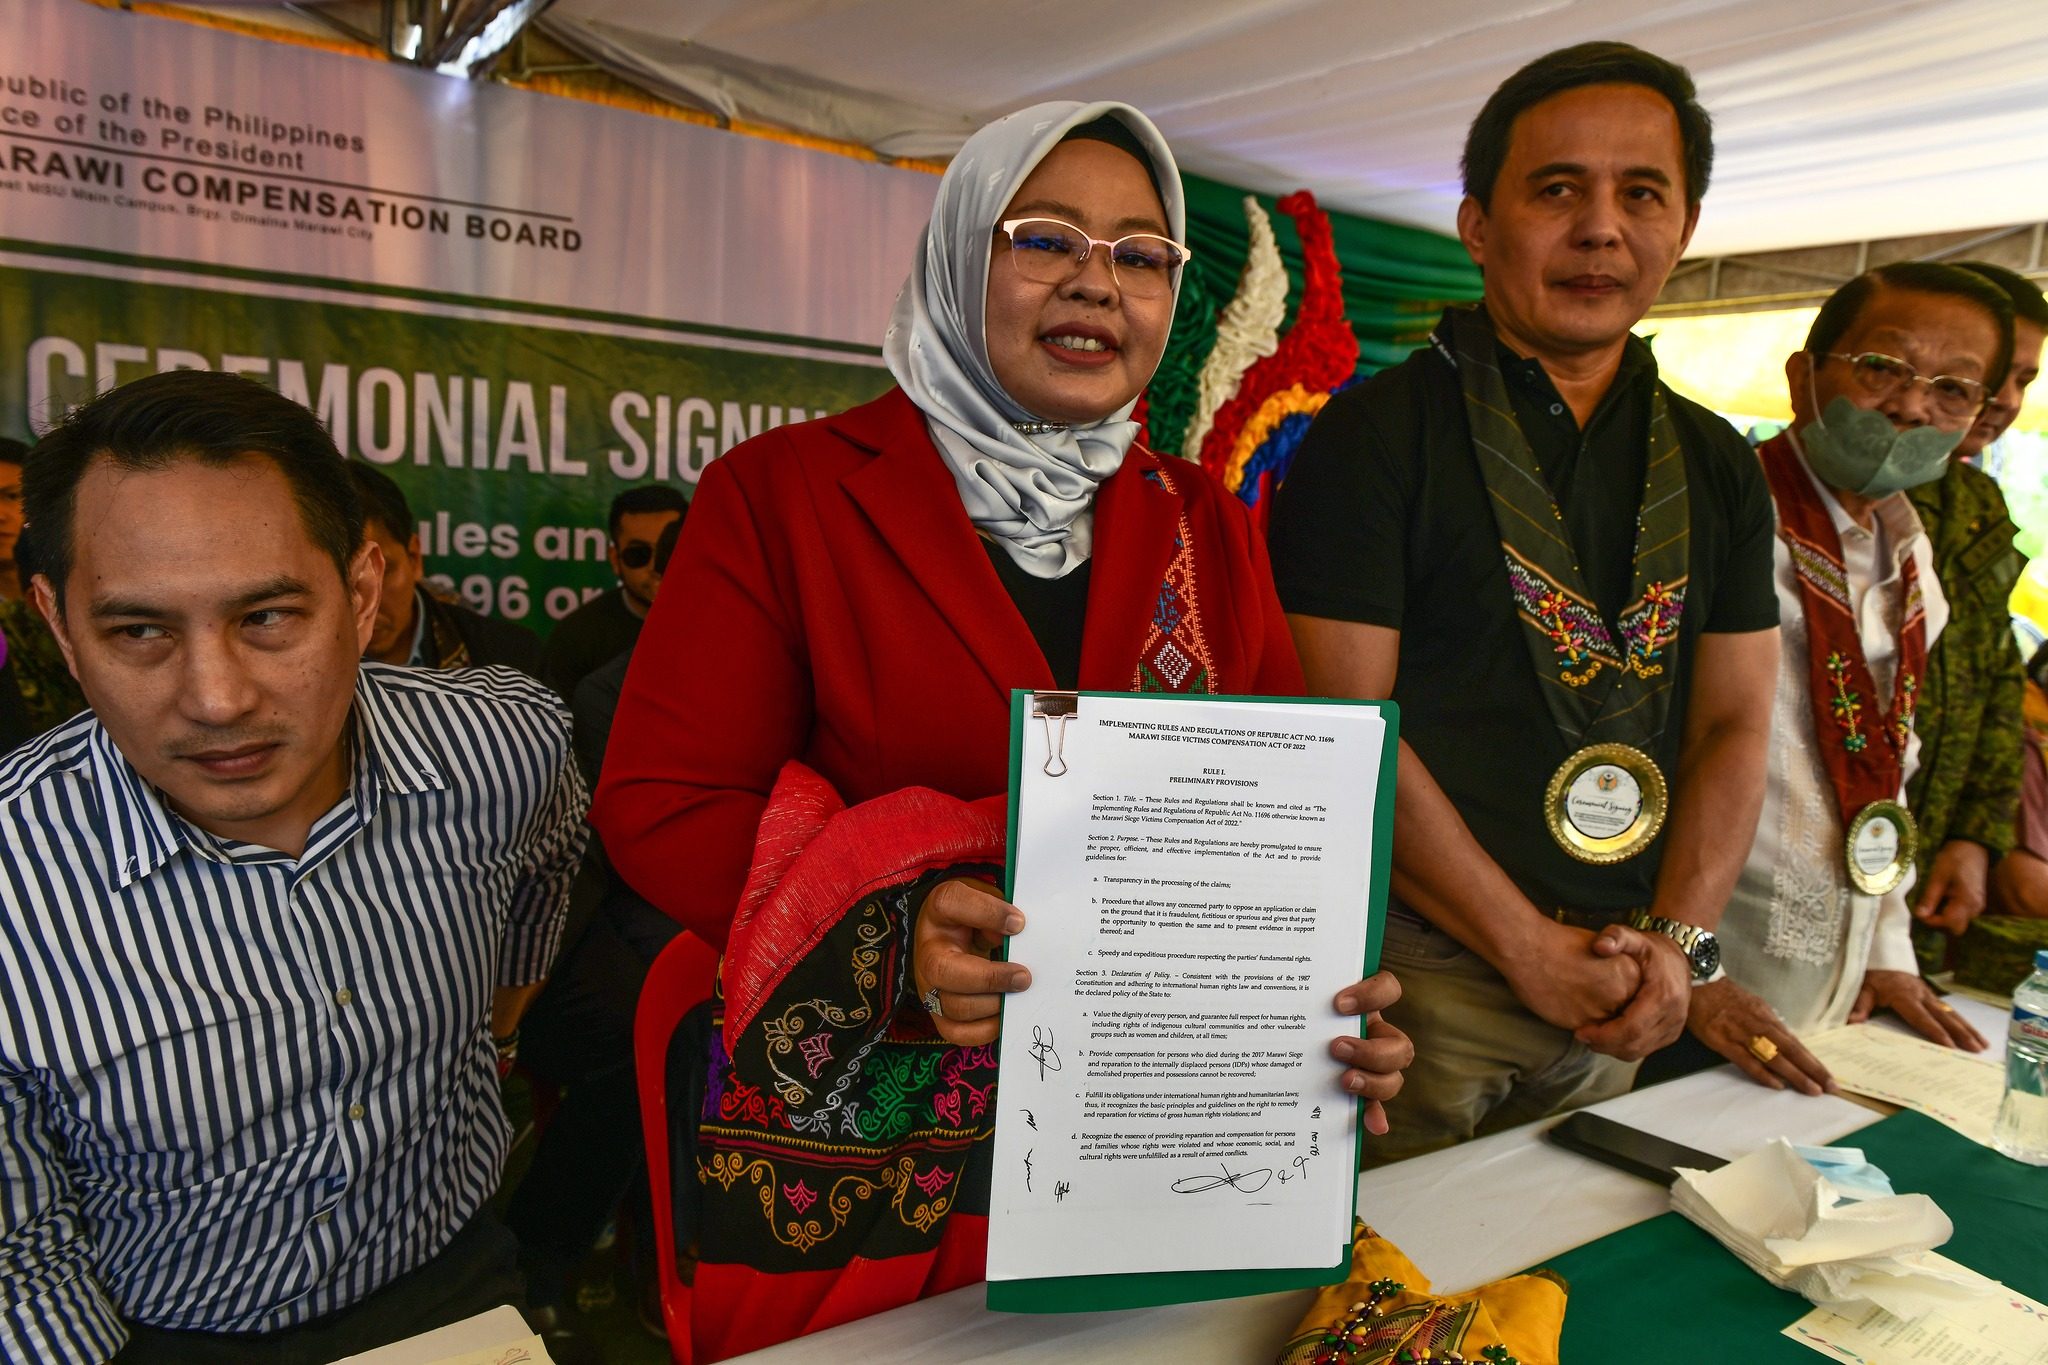 Marawi Compensation Board signs compensation law’s implementation rules